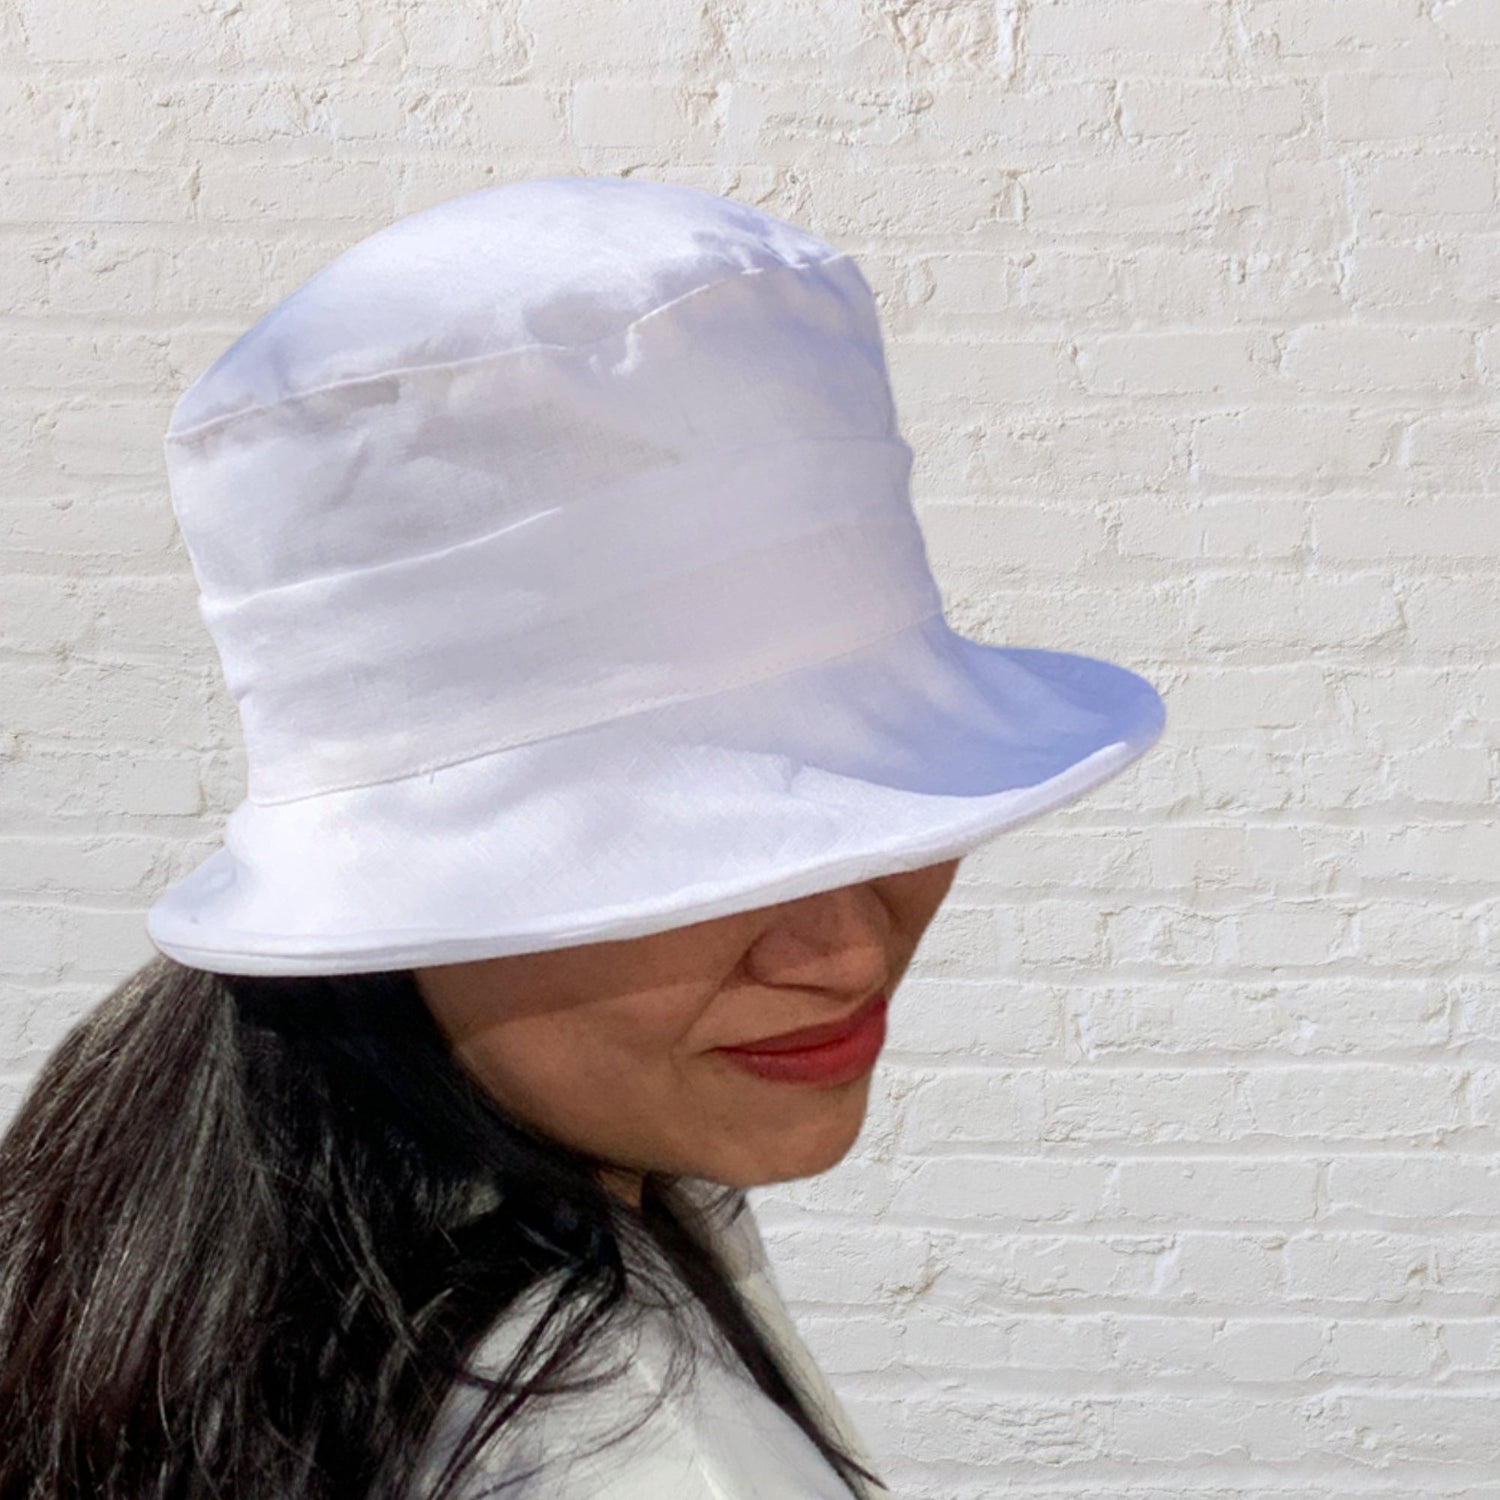 One-size-fits-all premium linen hat with UV50+ sun protection. Made in Quebec, Montreal, Canada by Geneviève Dostaler. Available in many colors. Perfect to complete your look with style and comfort.